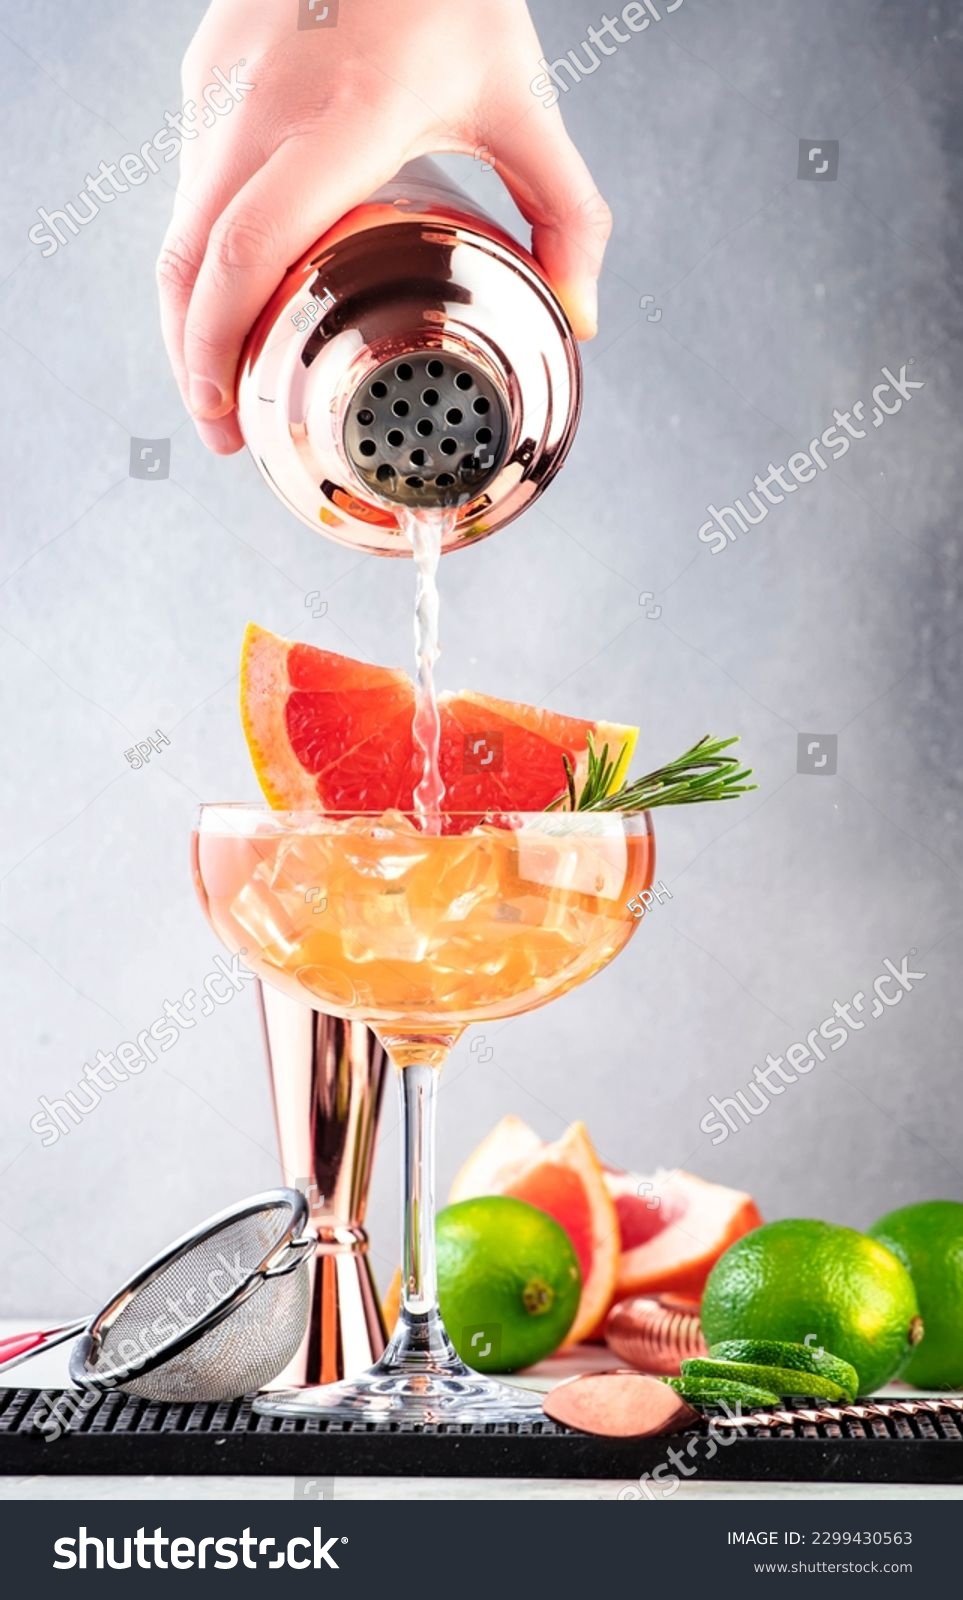 Bartender pours cocktail from shaker into glass. Grapefruit daiquiri alcoholic cocktail with white rum, syrup, fruit juice, lime and ice in garnished margarita glass. Gray background, bar tools #2299430563